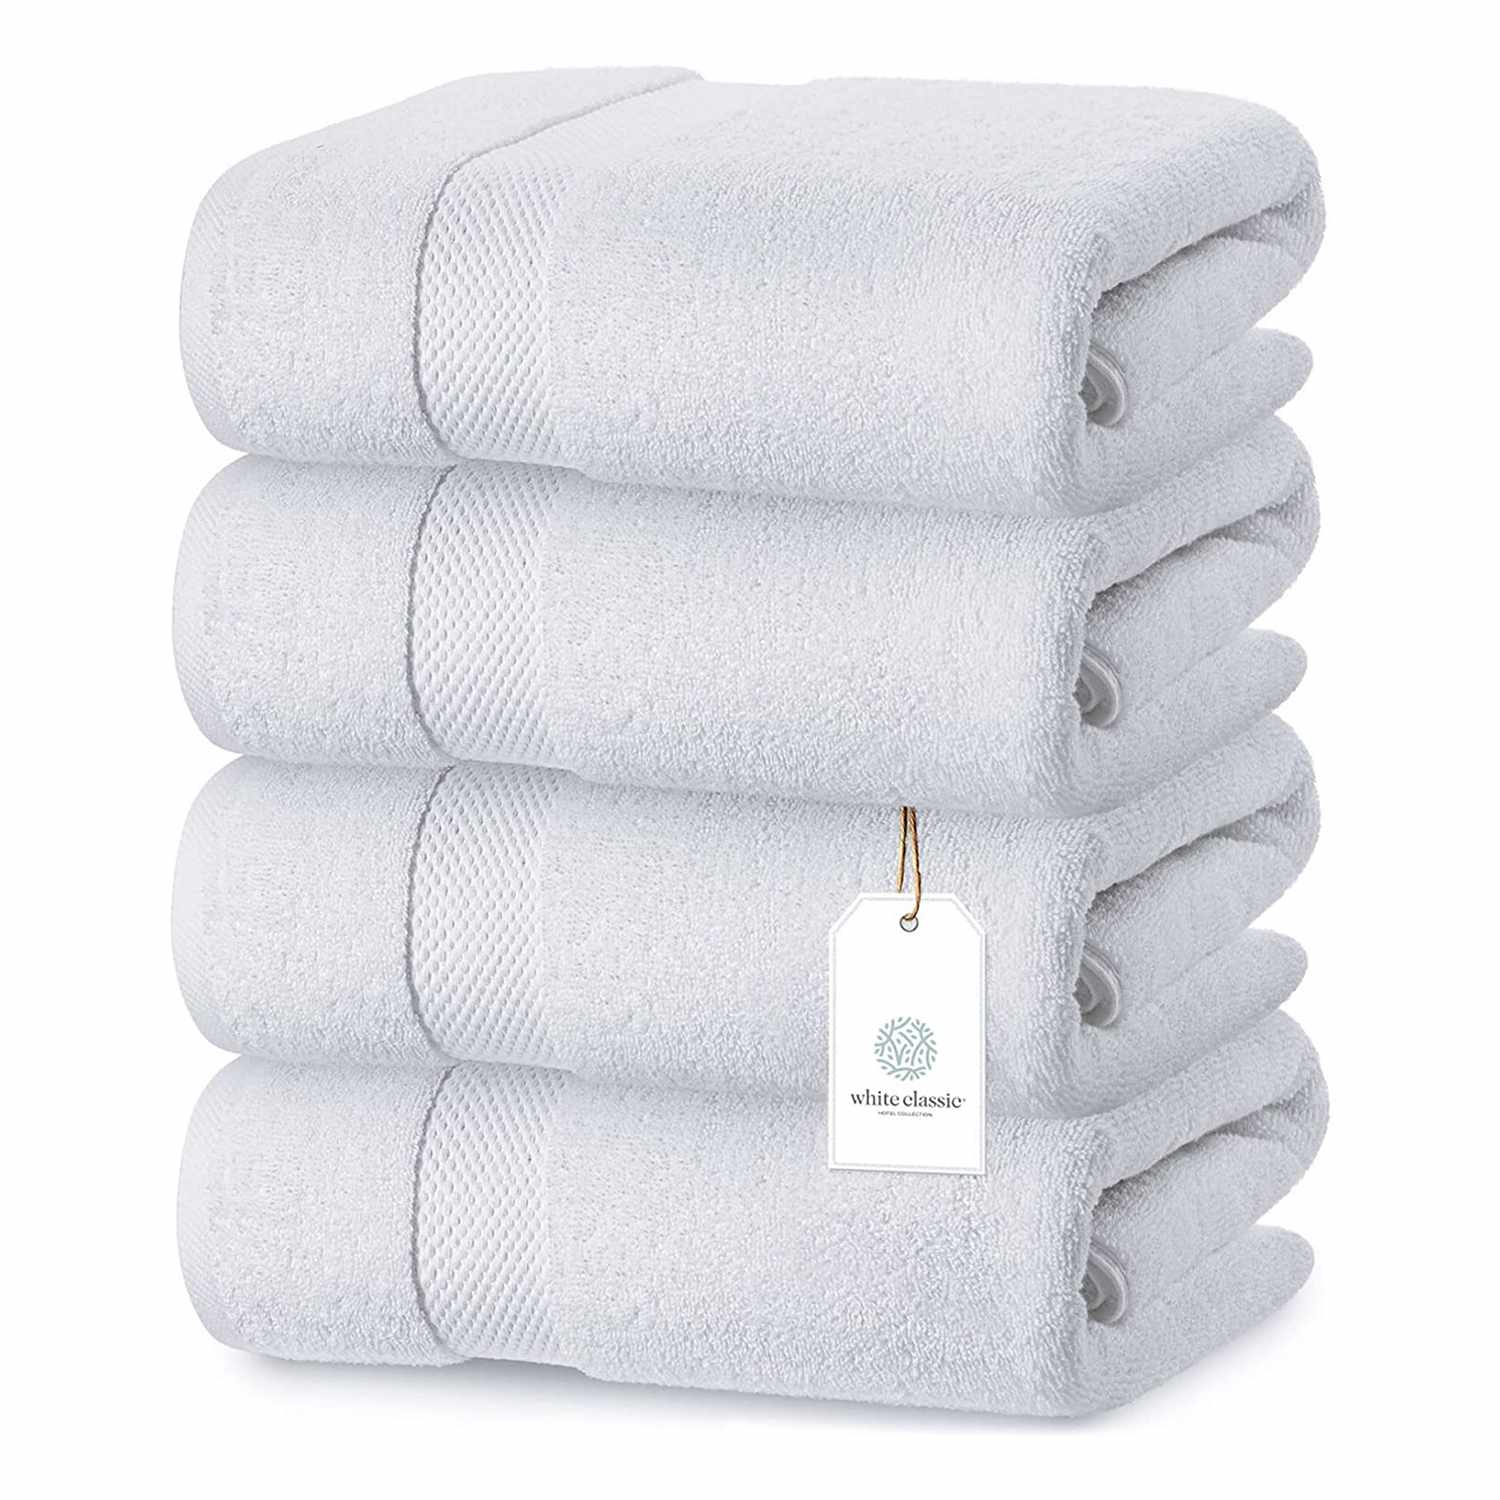 Best Bath Towels for a Spa-Like Experience Every Day